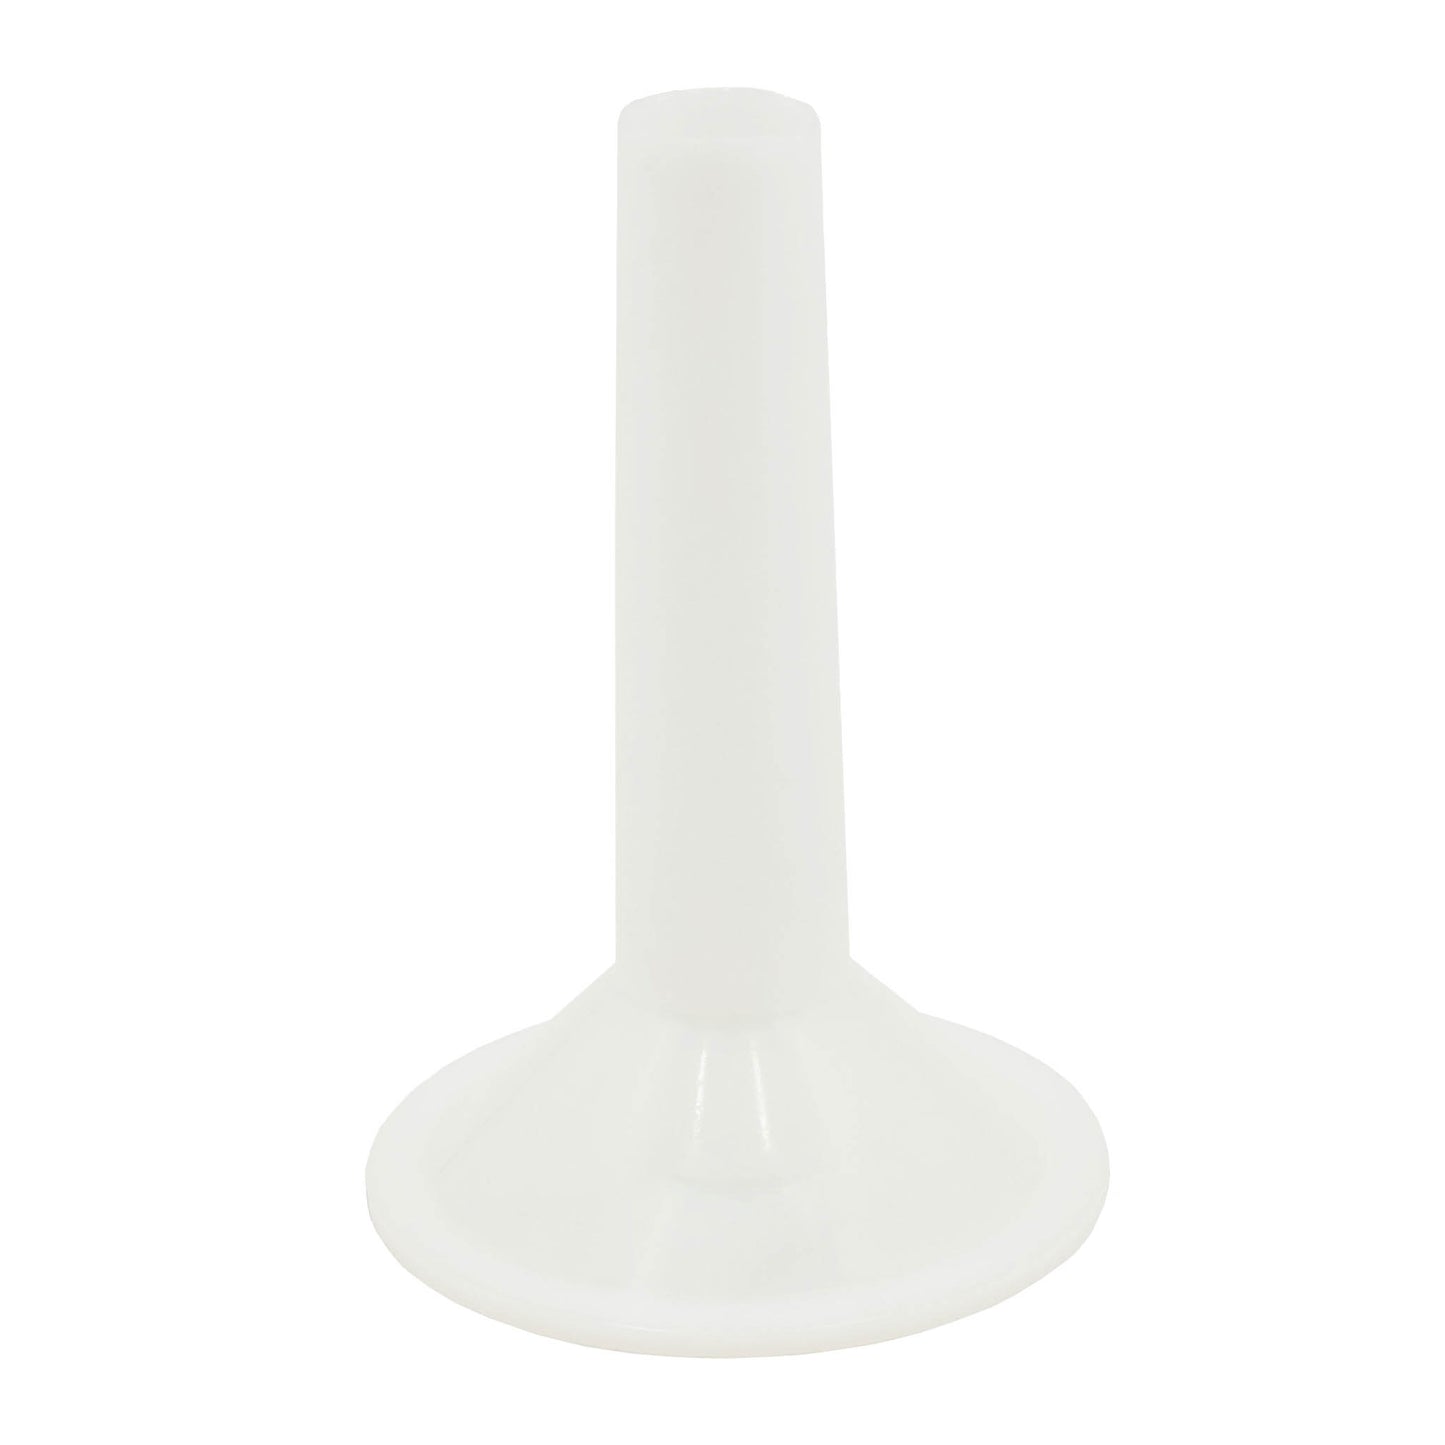 white food grade plastic salami and sausage mincer funnel for size 8 mincers 25mm in diameter.